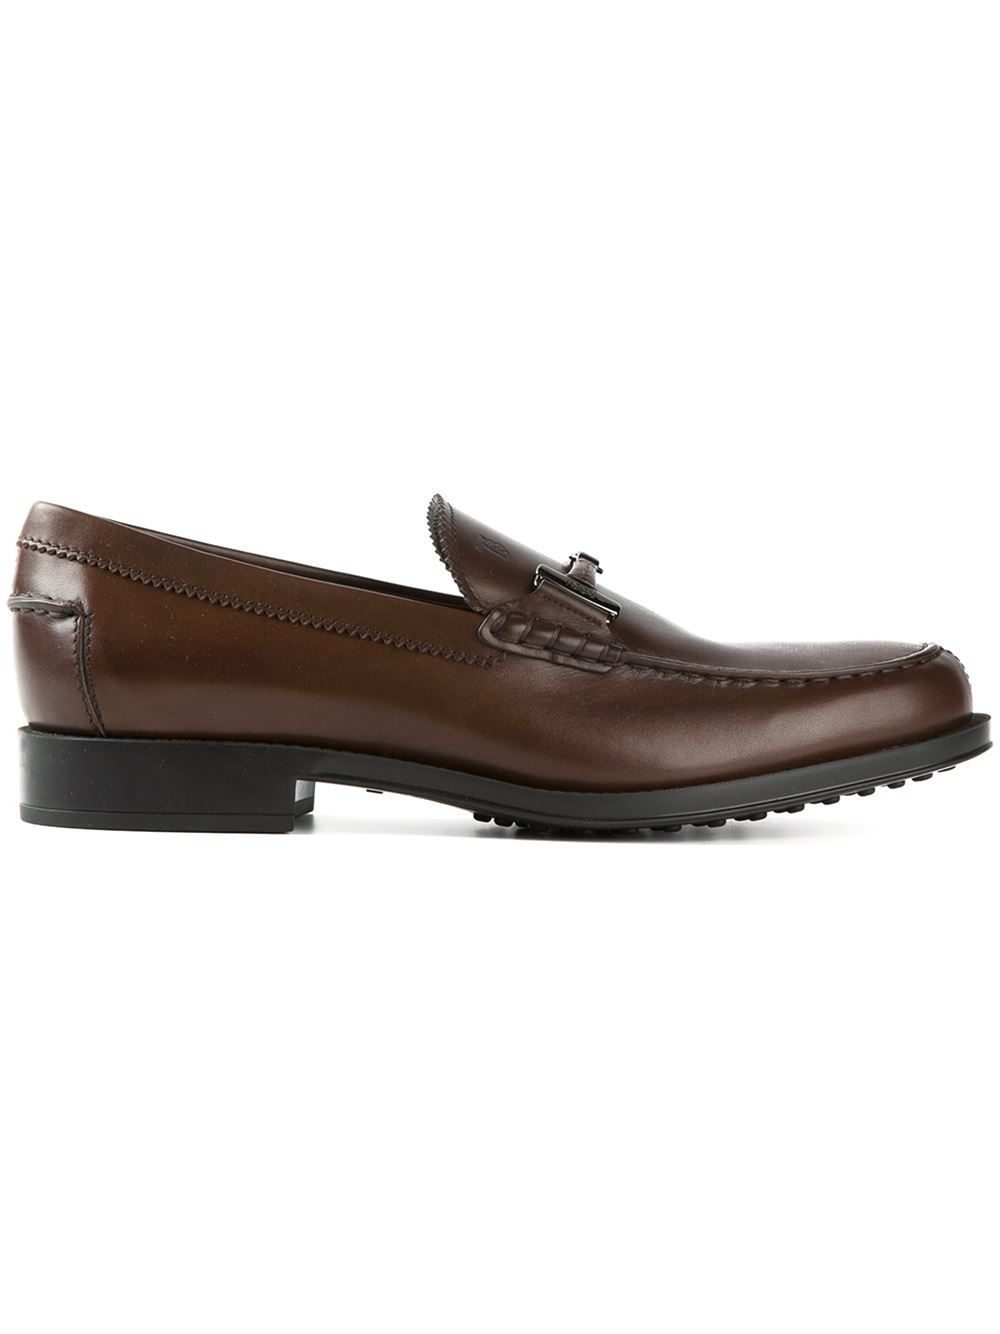 Lyst - Tod'S Classic Loafers in Brown for Men